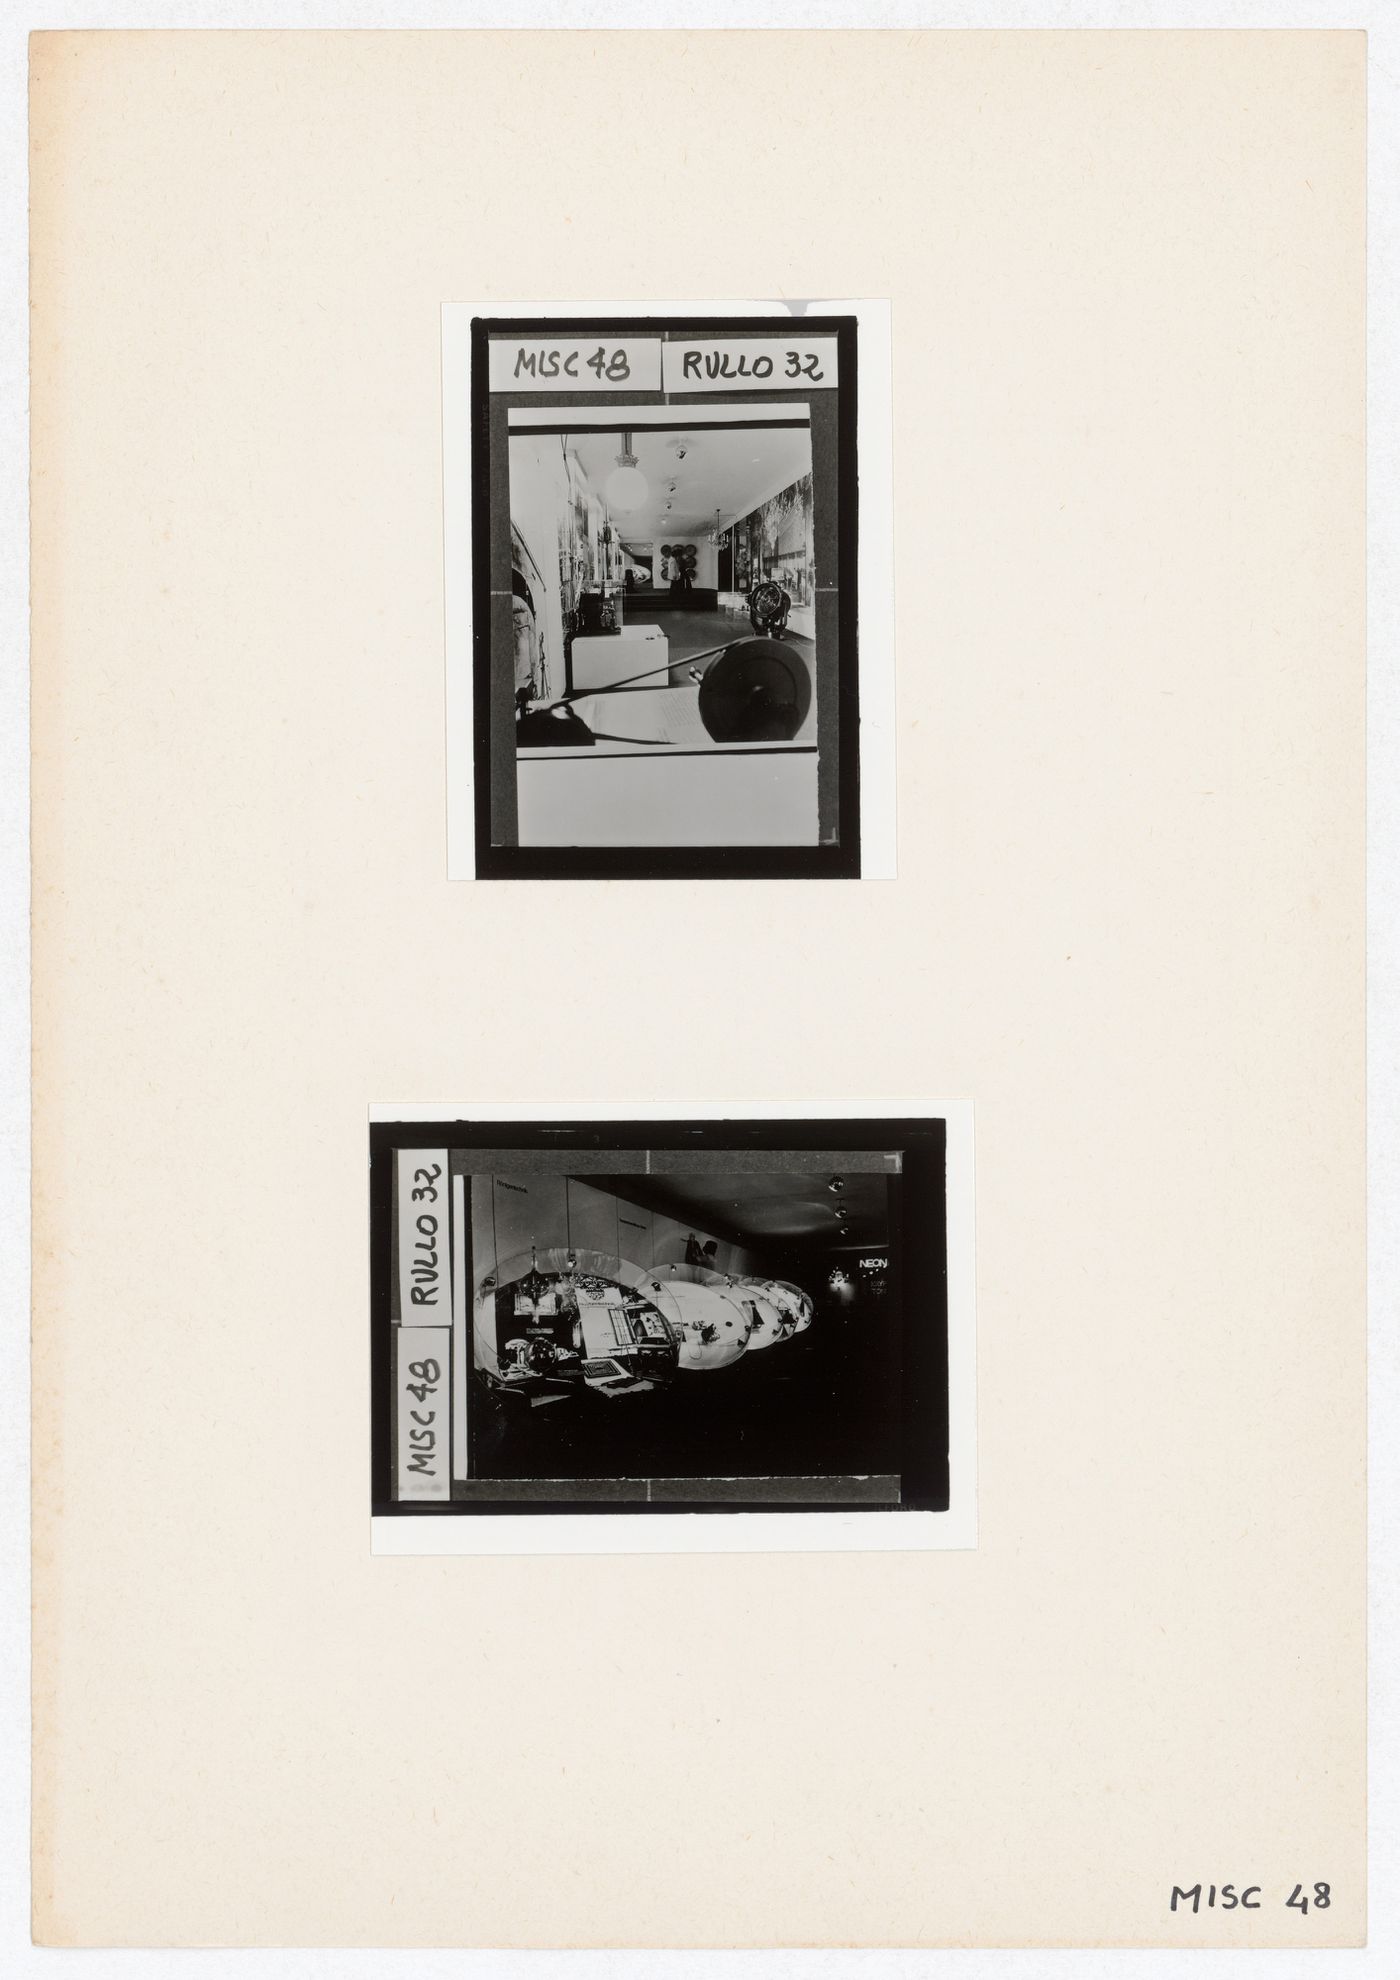 Photographs for the exhibition Hans Hollein. Opere 1960-1988